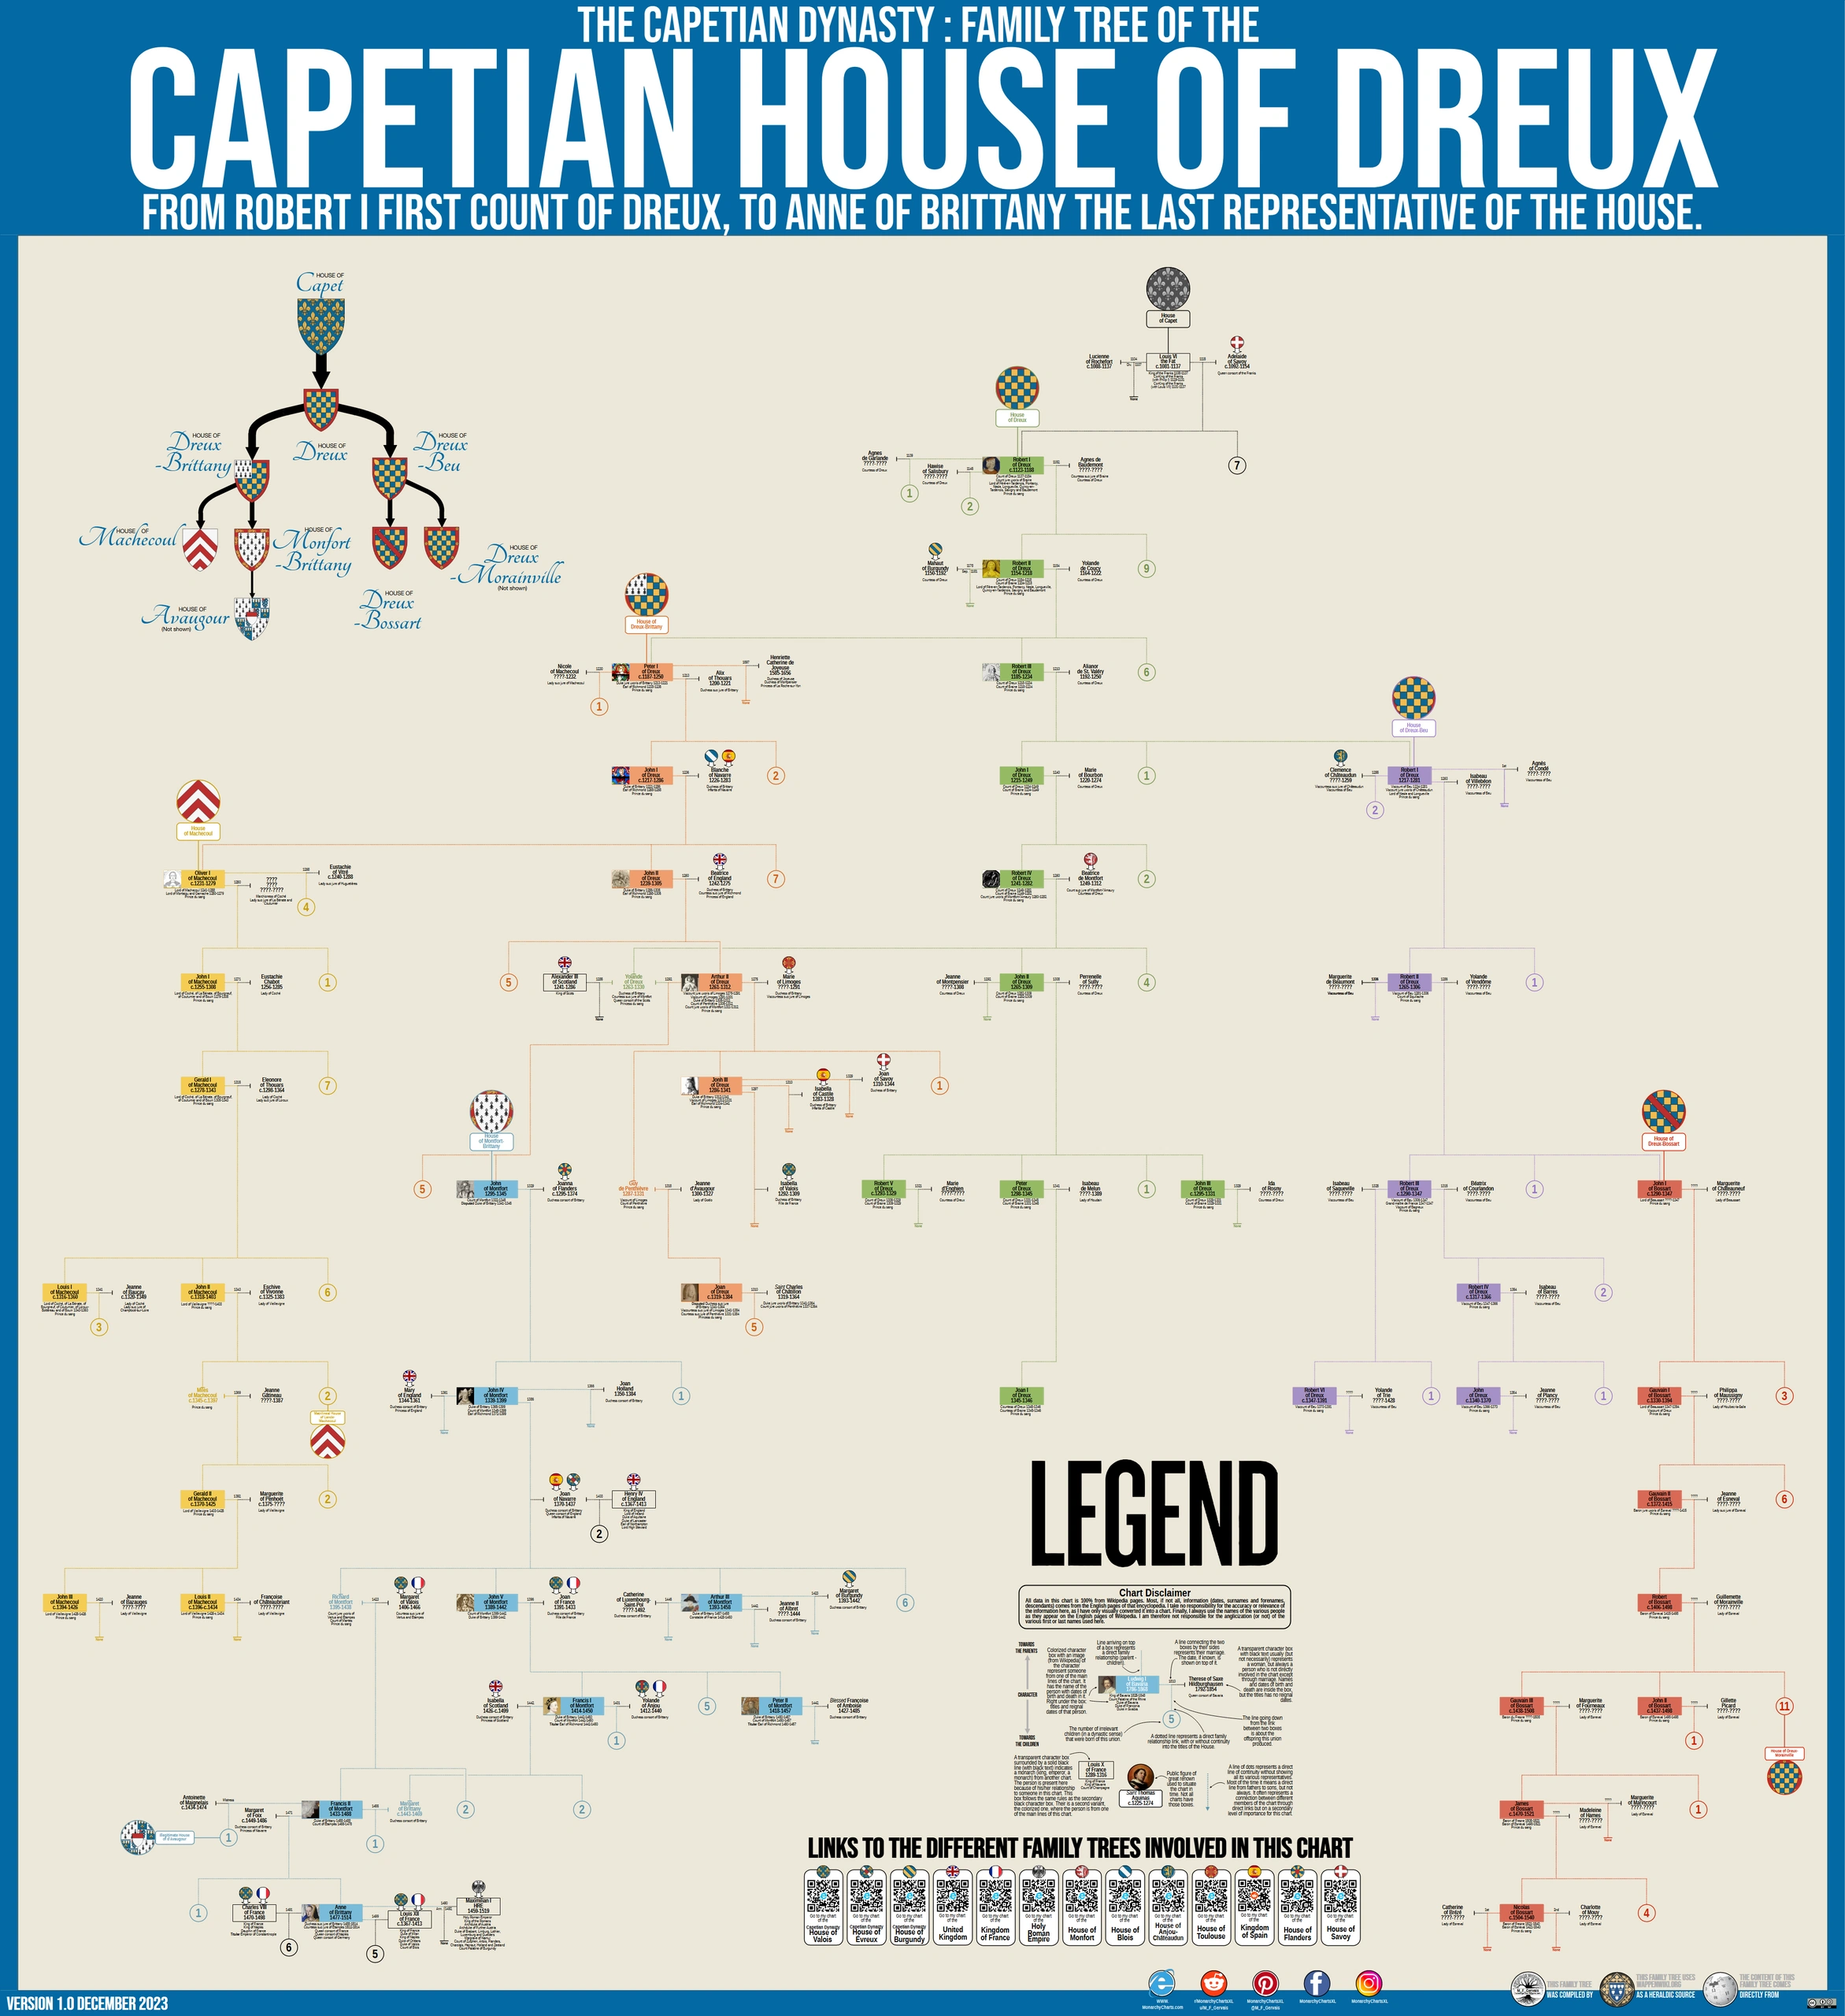 CHART, FAMILY TREE OF THE CAPETIAN DYNASTY: HOUSE OF DREUX.